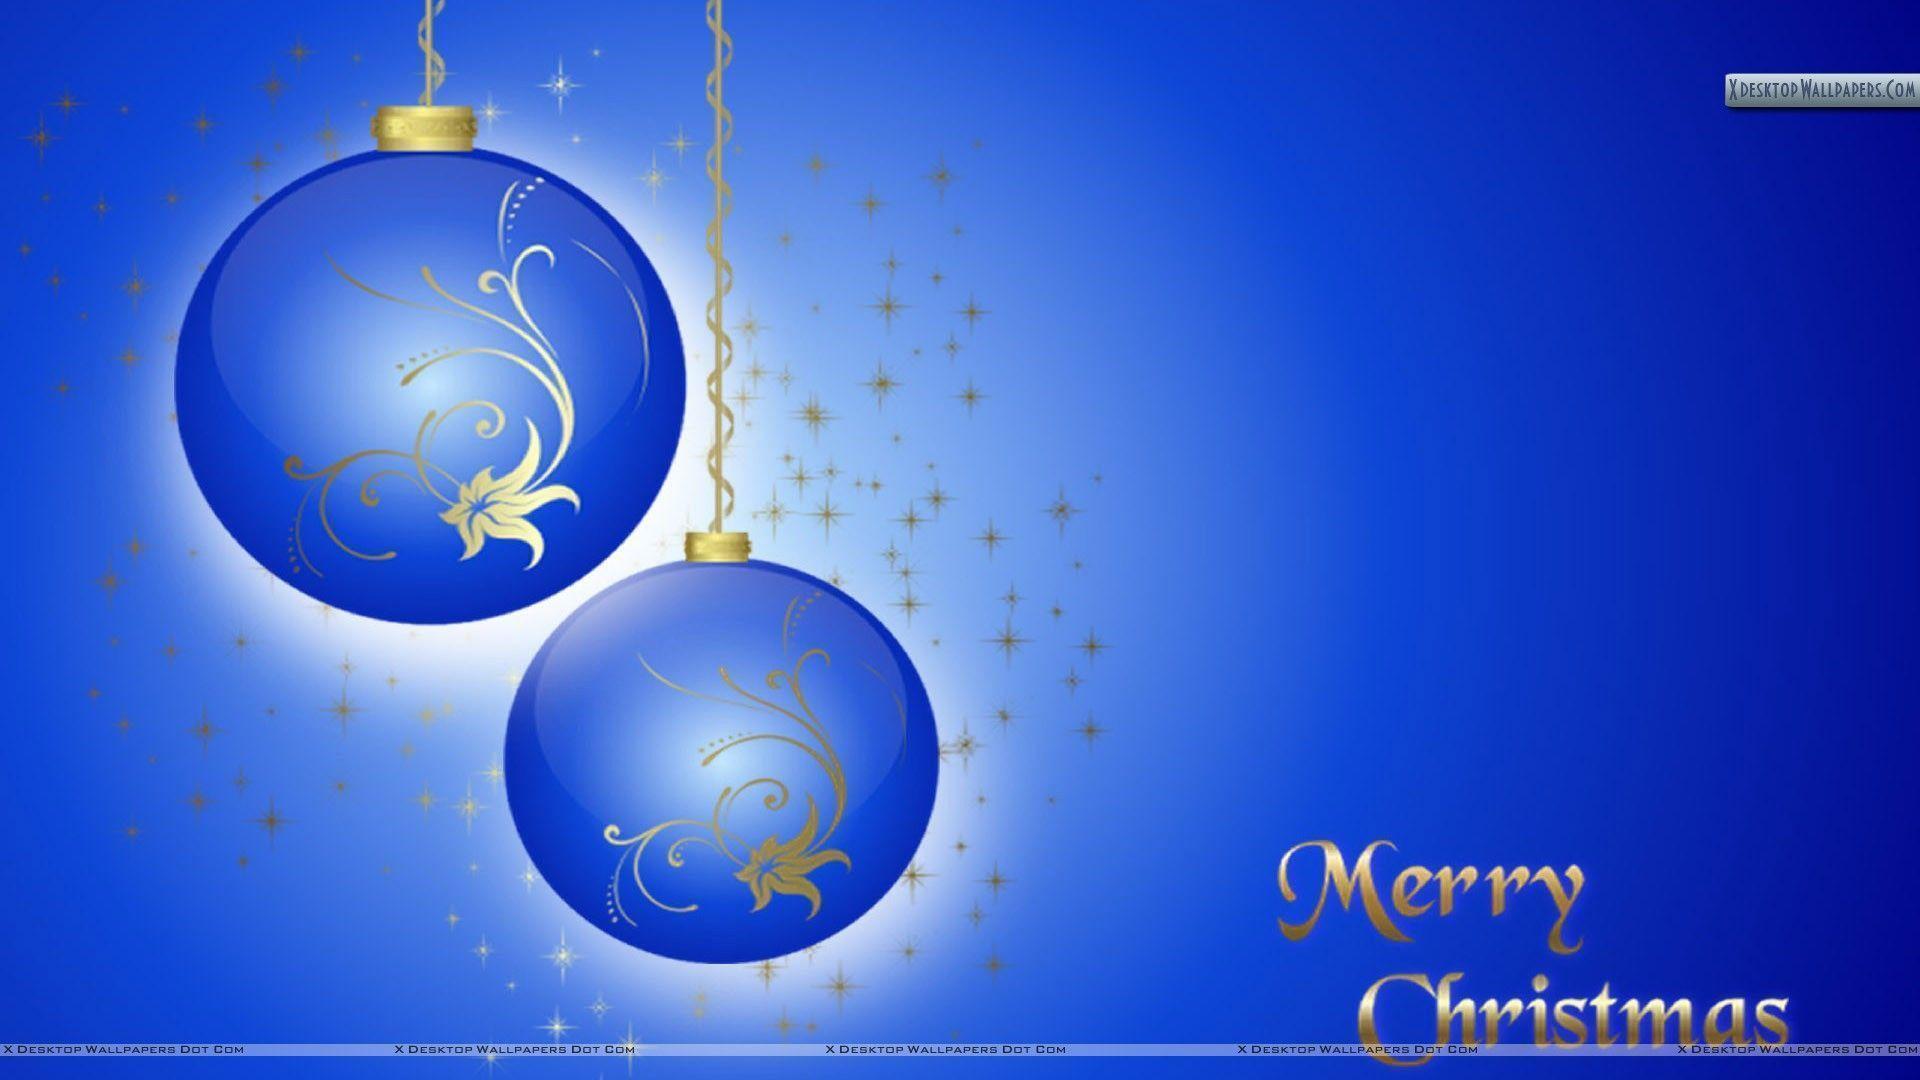 Merry Christmas Background Picture, All Christmas Wallpaper